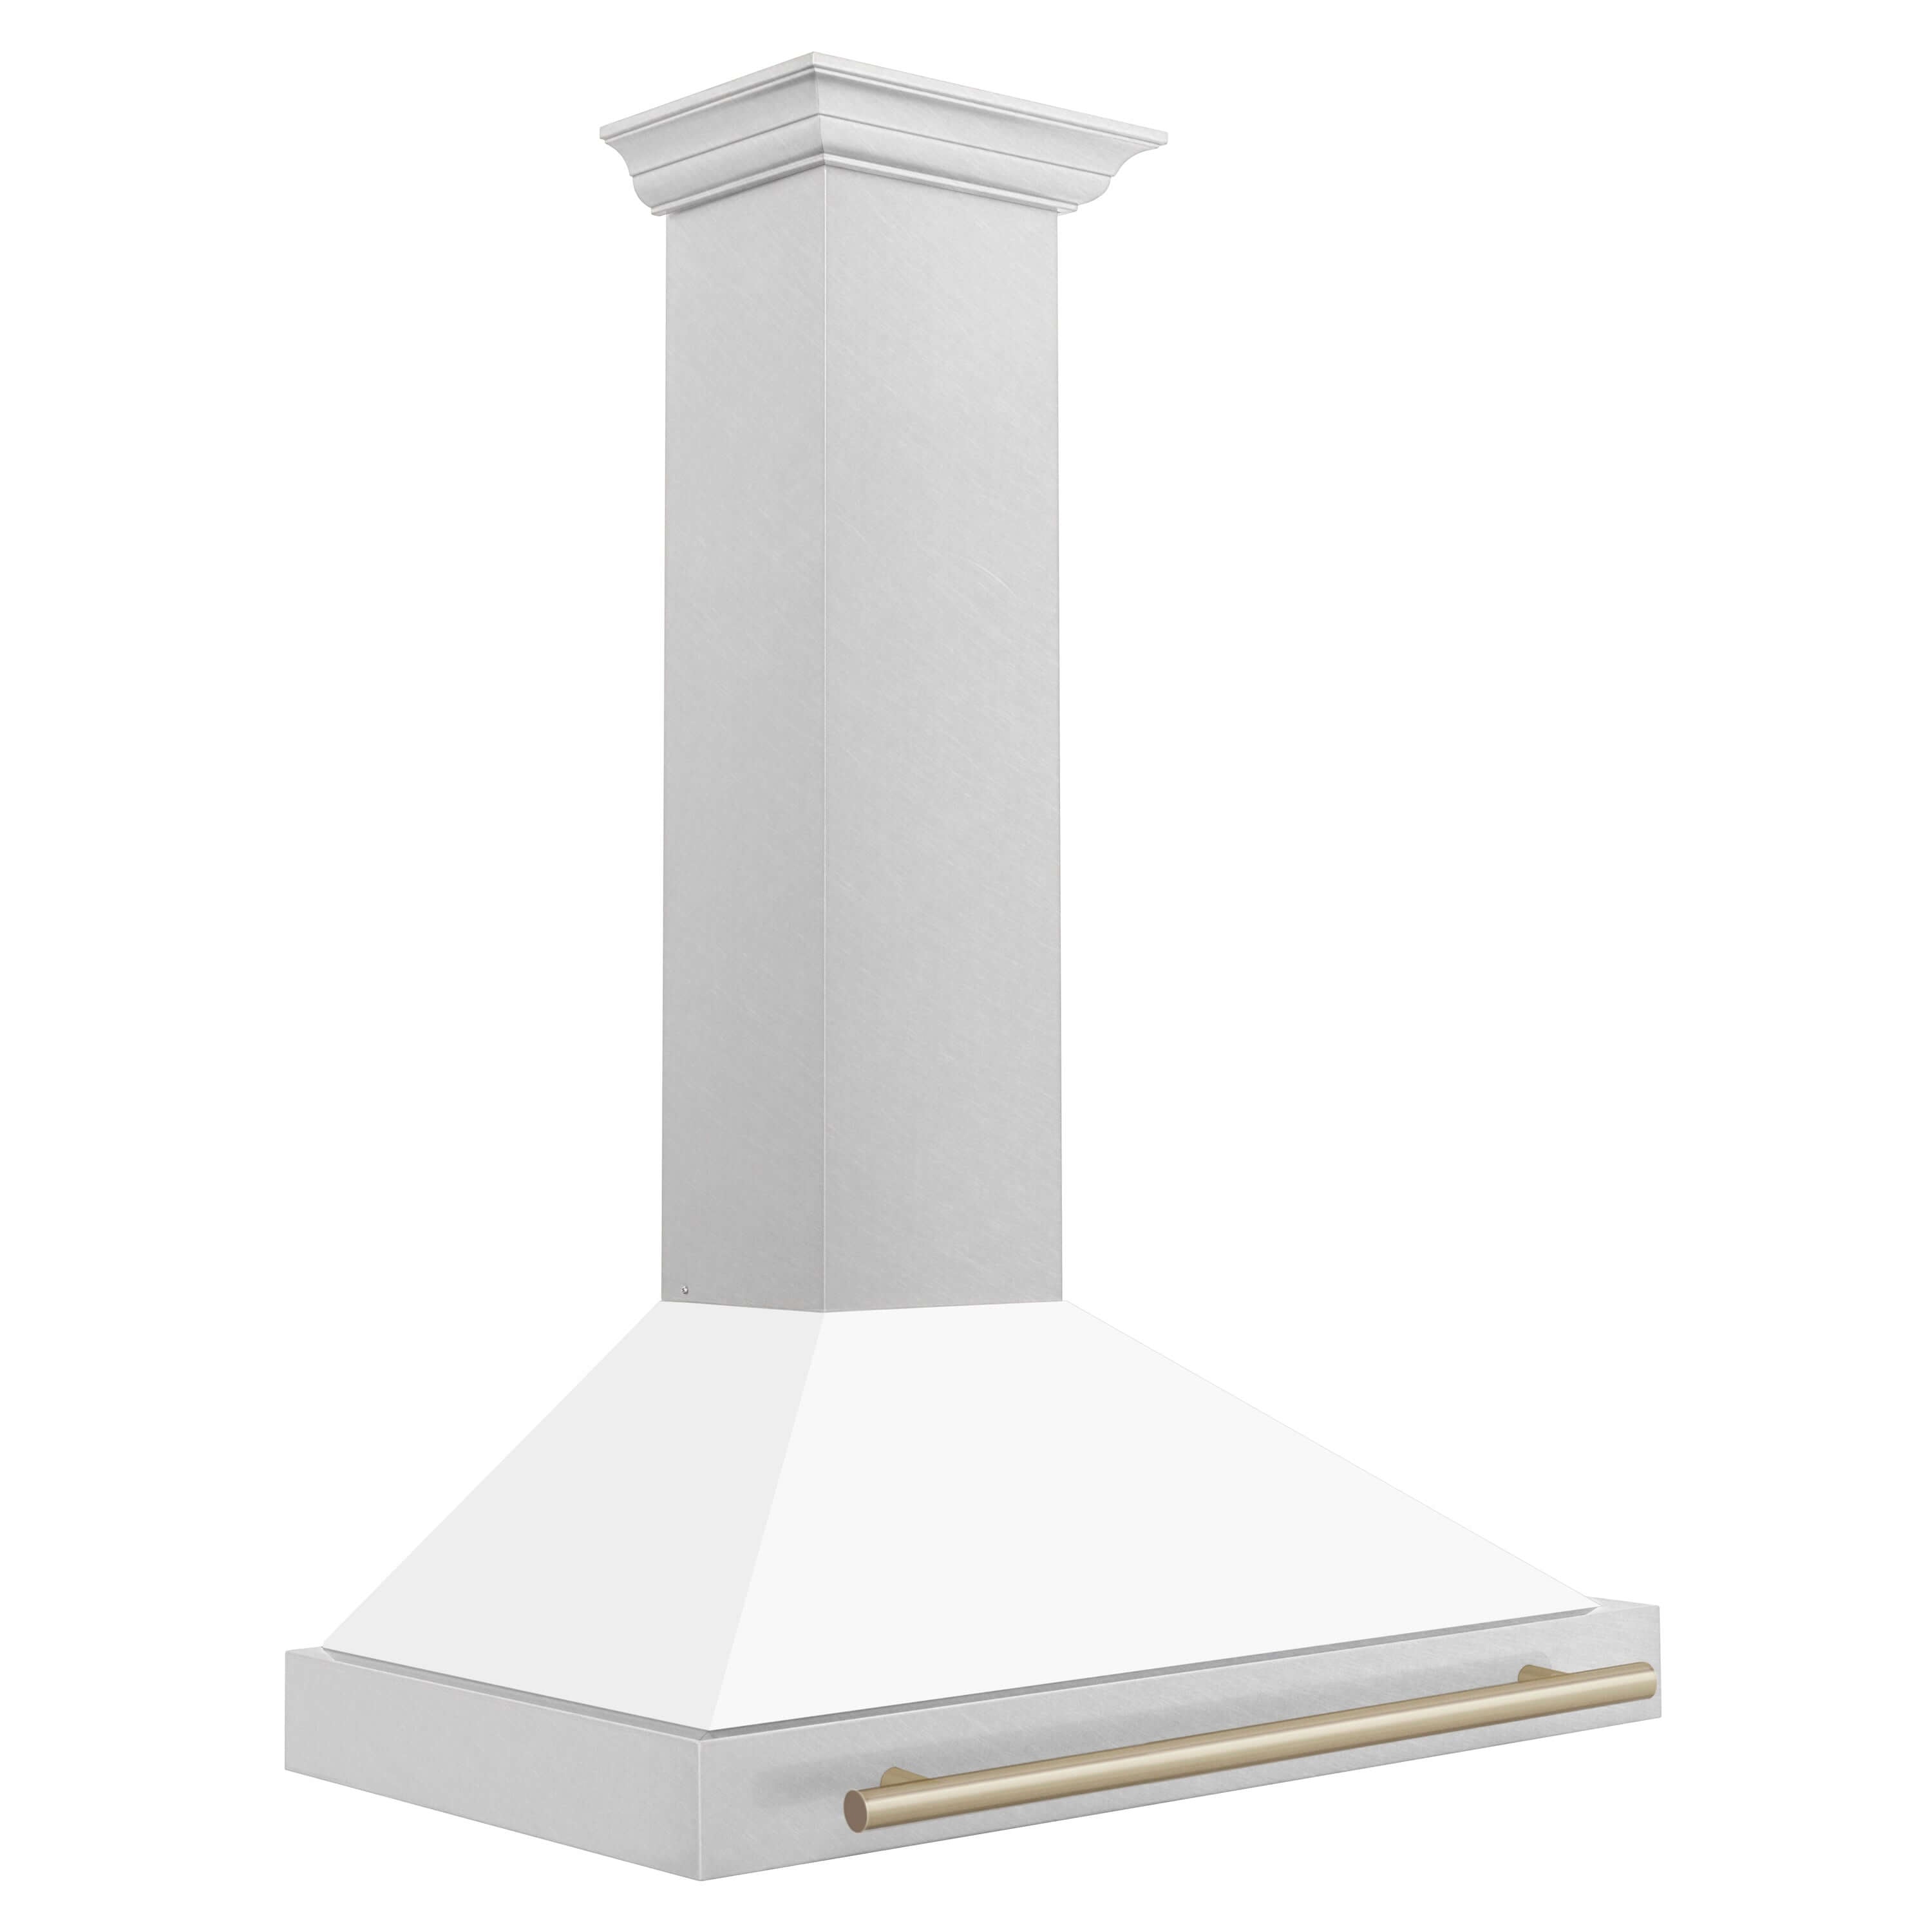 ZLINE 36 in. Autograph Edition in Fingerprint Resistant Stainless Steel Range Hood with White Matte Shell with Champagne Bronze Handle Side View